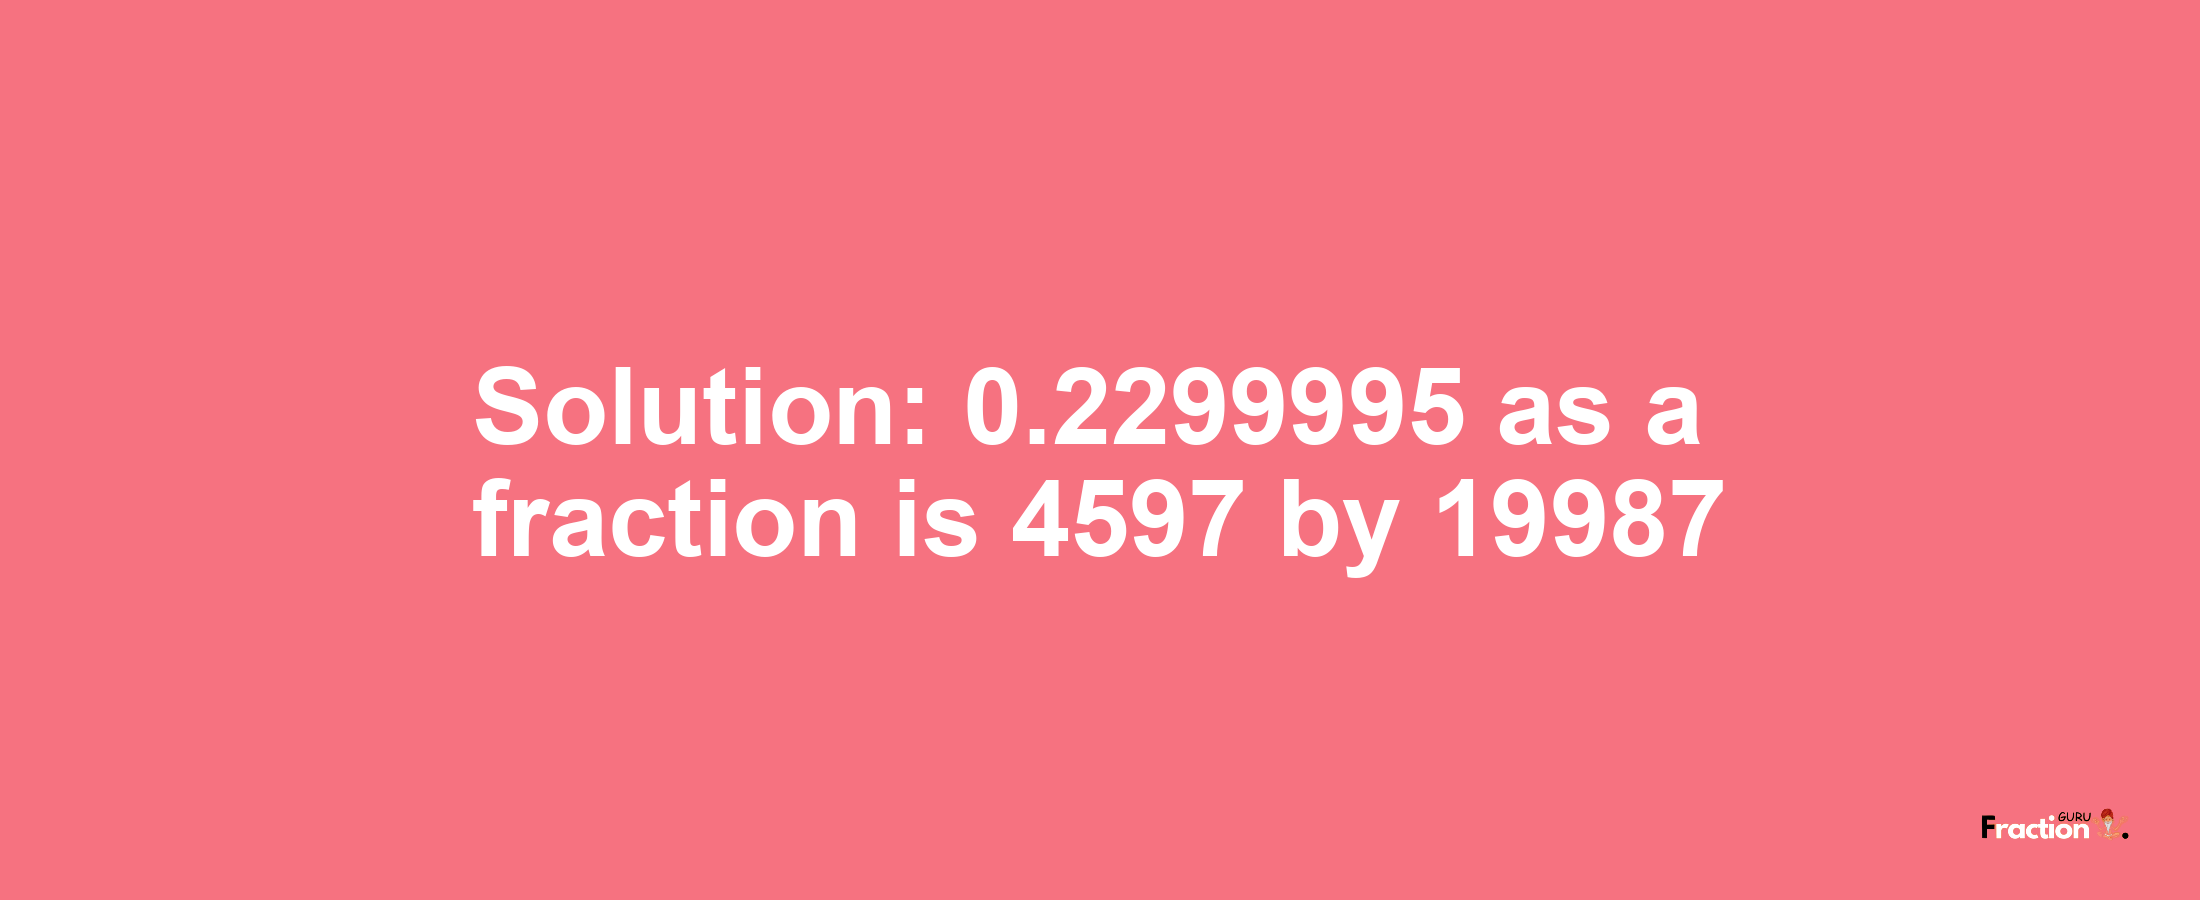 Solution:0.2299995 as a fraction is 4597/19987